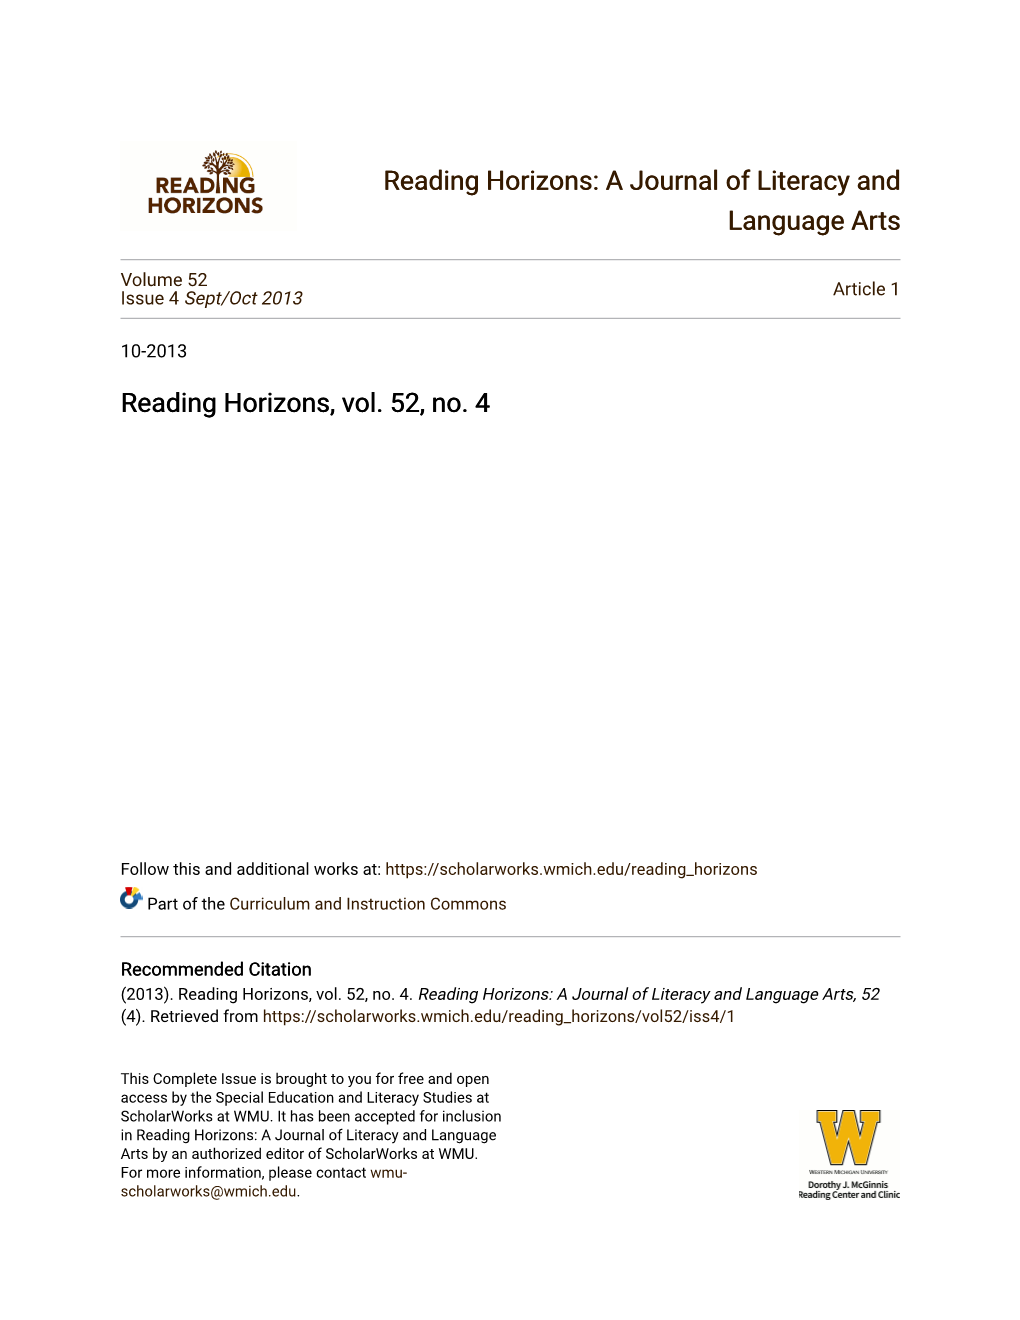 Reading Horizons: a Journal of Literacy and Language Arts